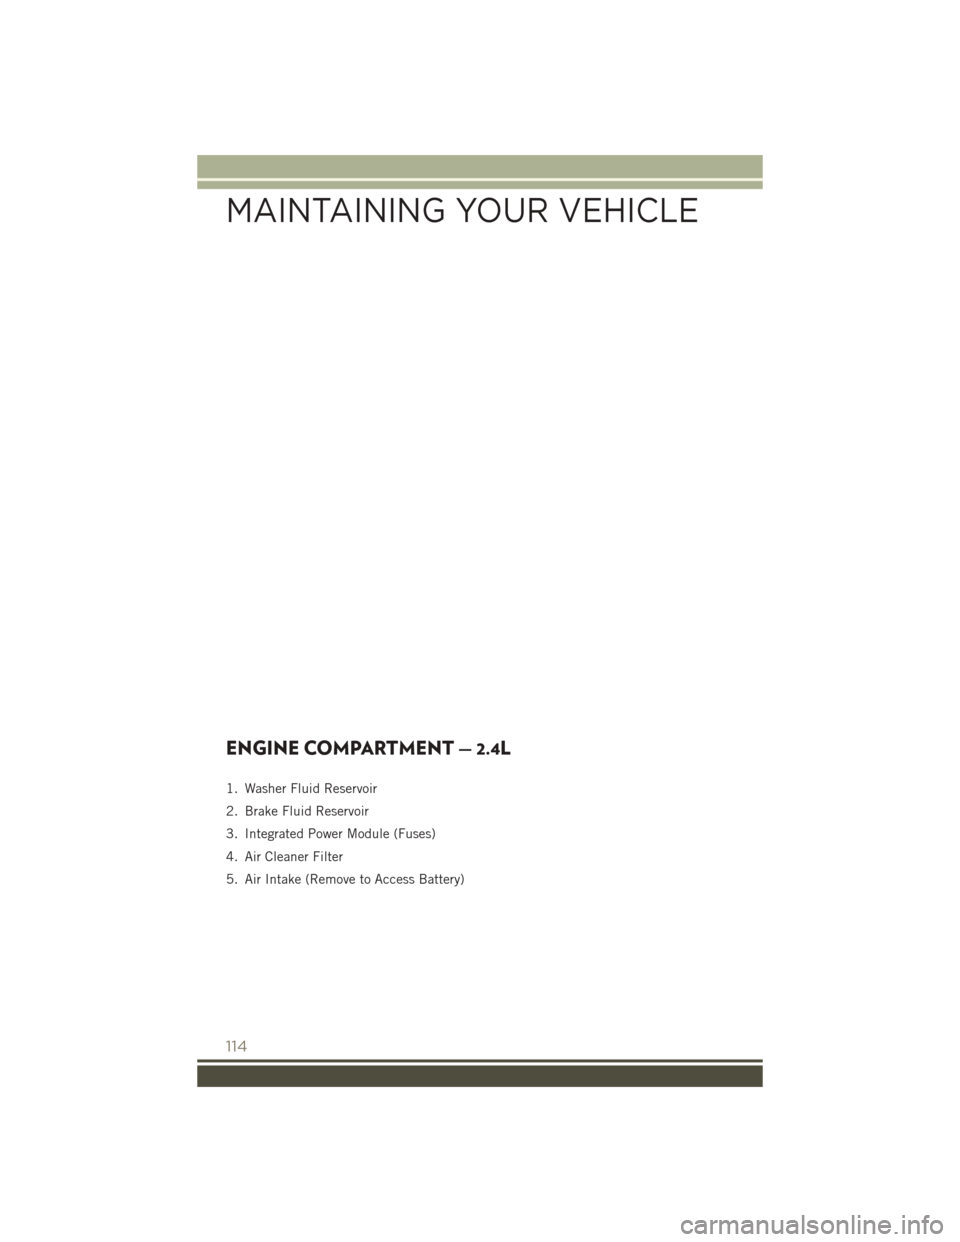 JEEP PATRIOT 2016 1.G User Guide ENGINE COMPARTMENT — 2.4L
1. Washer Fluid Reservoir
2. Brake Fluid Reservoir
3. Integrated Power Module (Fuses)
4. Air Cleaner Filter
5. Air Intake (Remove to Access Battery)
MAINTAINING YOUR VEHICL